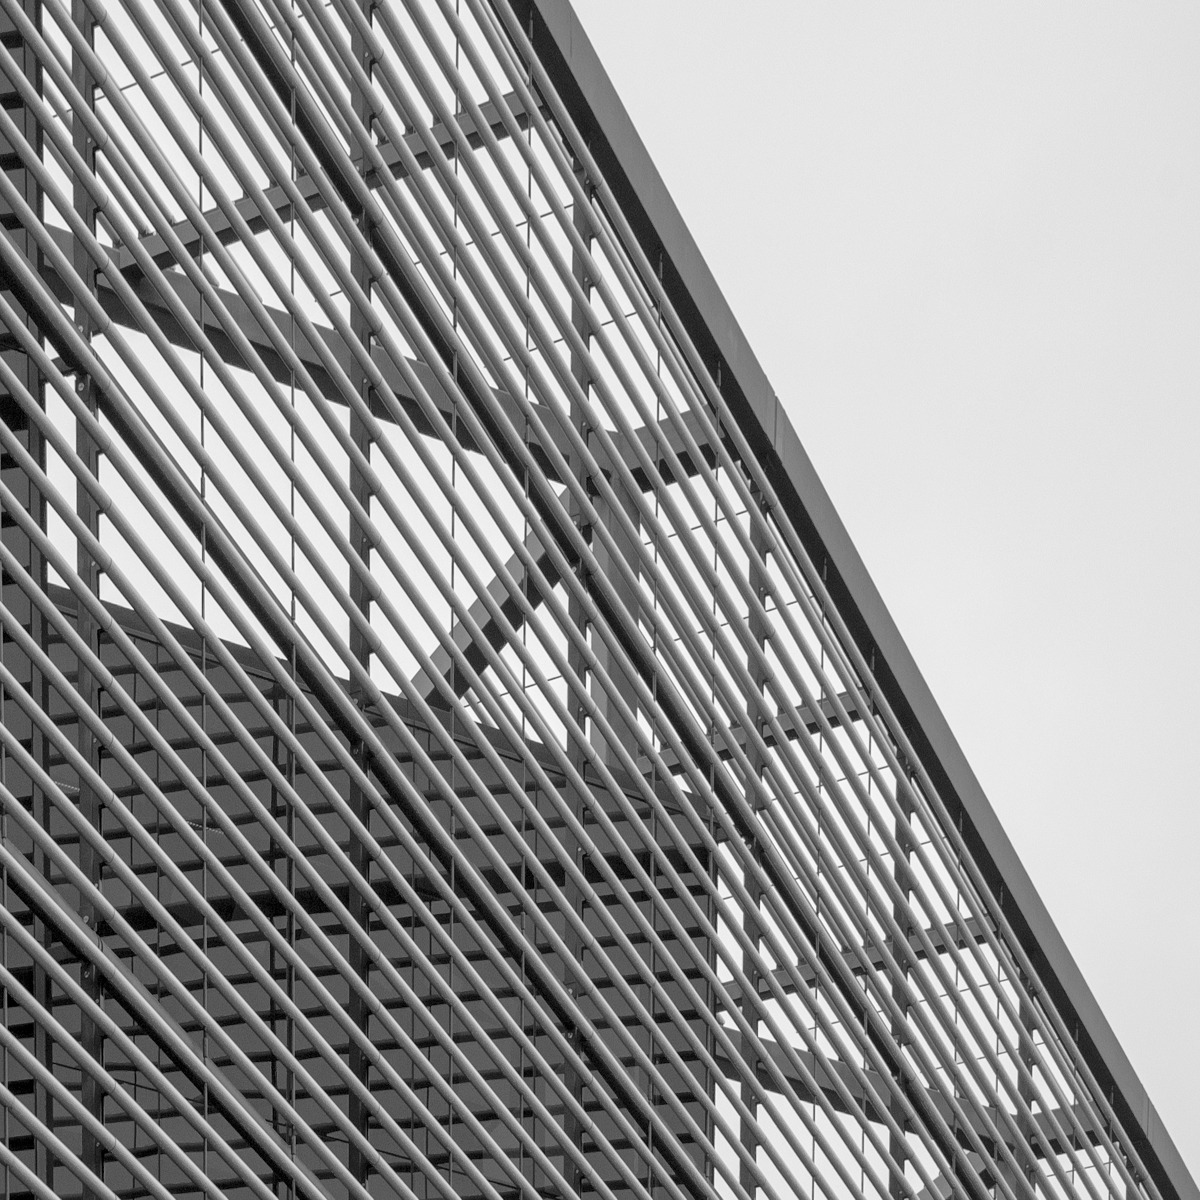 This is a close-up of the More London Building on More London Riverside between London and Tower Bridges. This image is part of our London architectural abstracts portfolio.